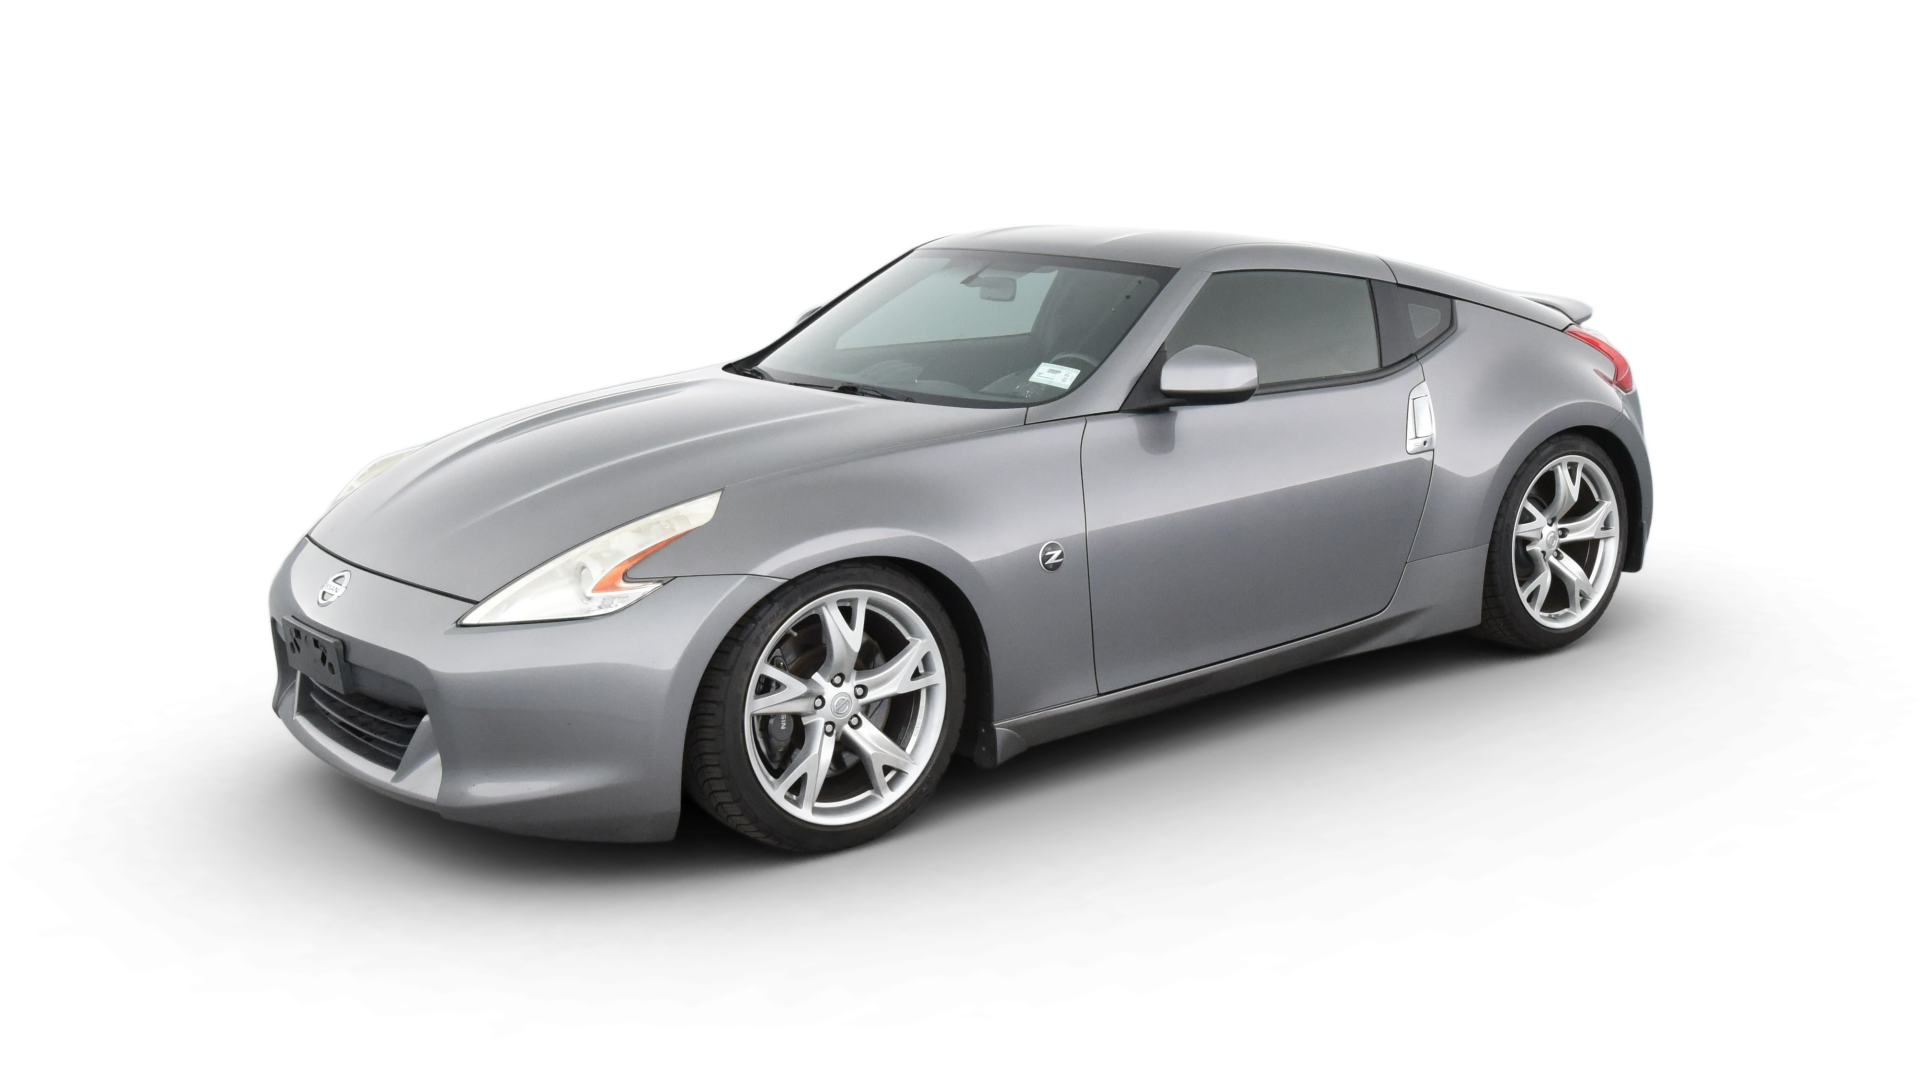 Used 2012 Nissan 370Z For Sale Online | Carvana